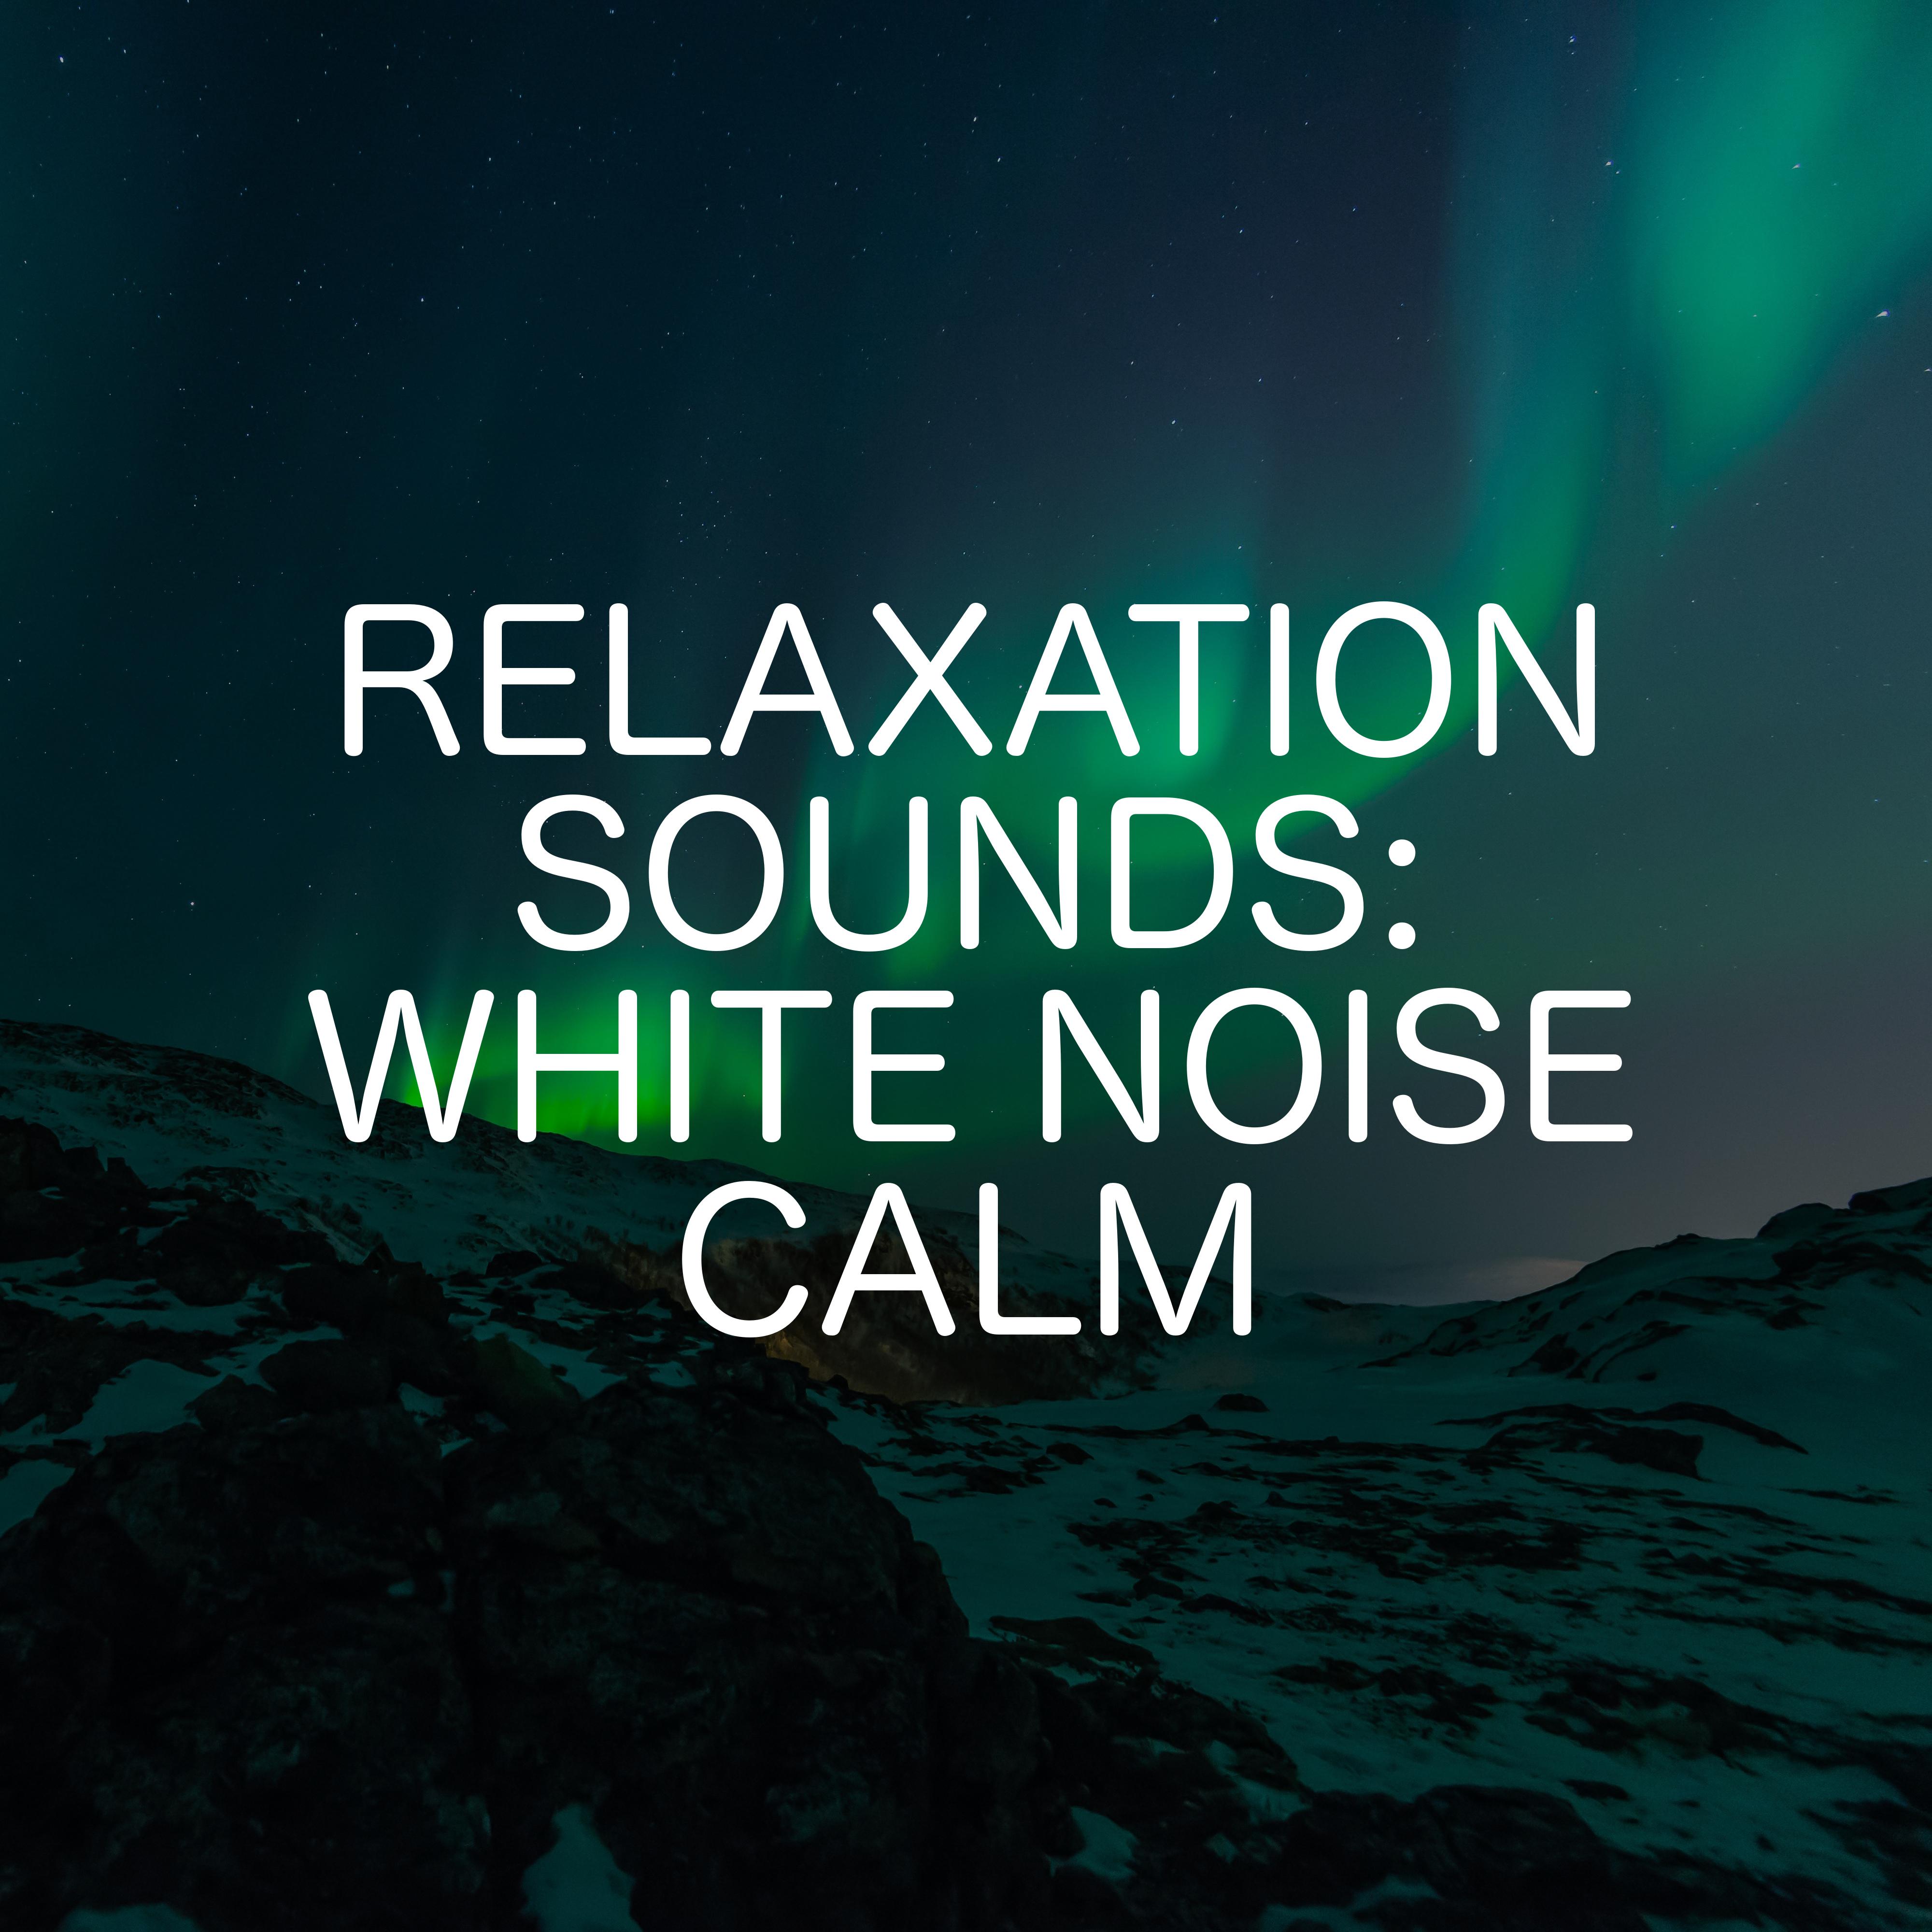 Relaxation Sounds: White Noise Calm